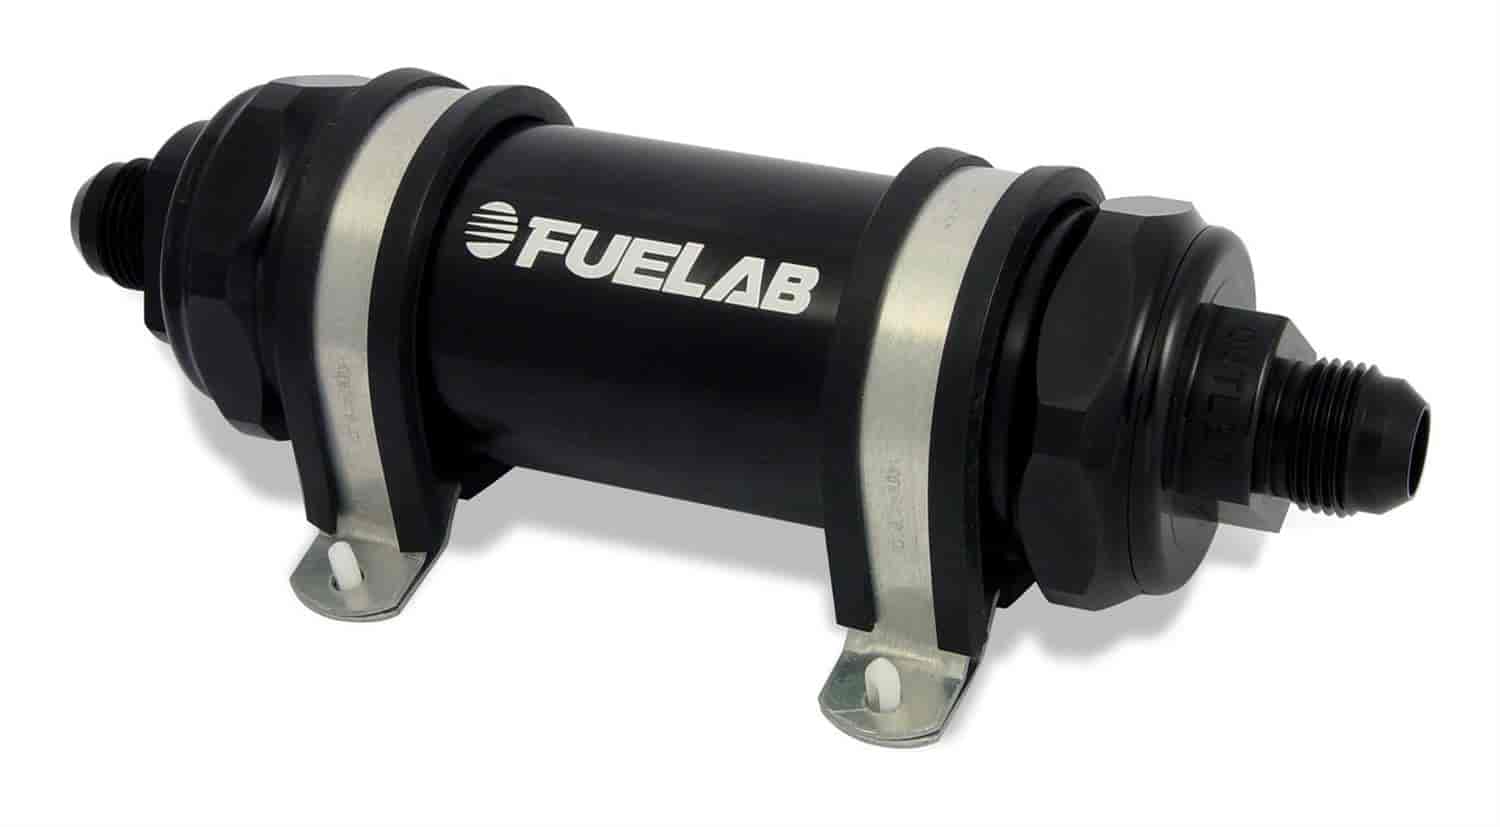 In-Line Fuel Filter Long Length -6AN Inlet/-12AN Outlet 75 micron stainless steel element